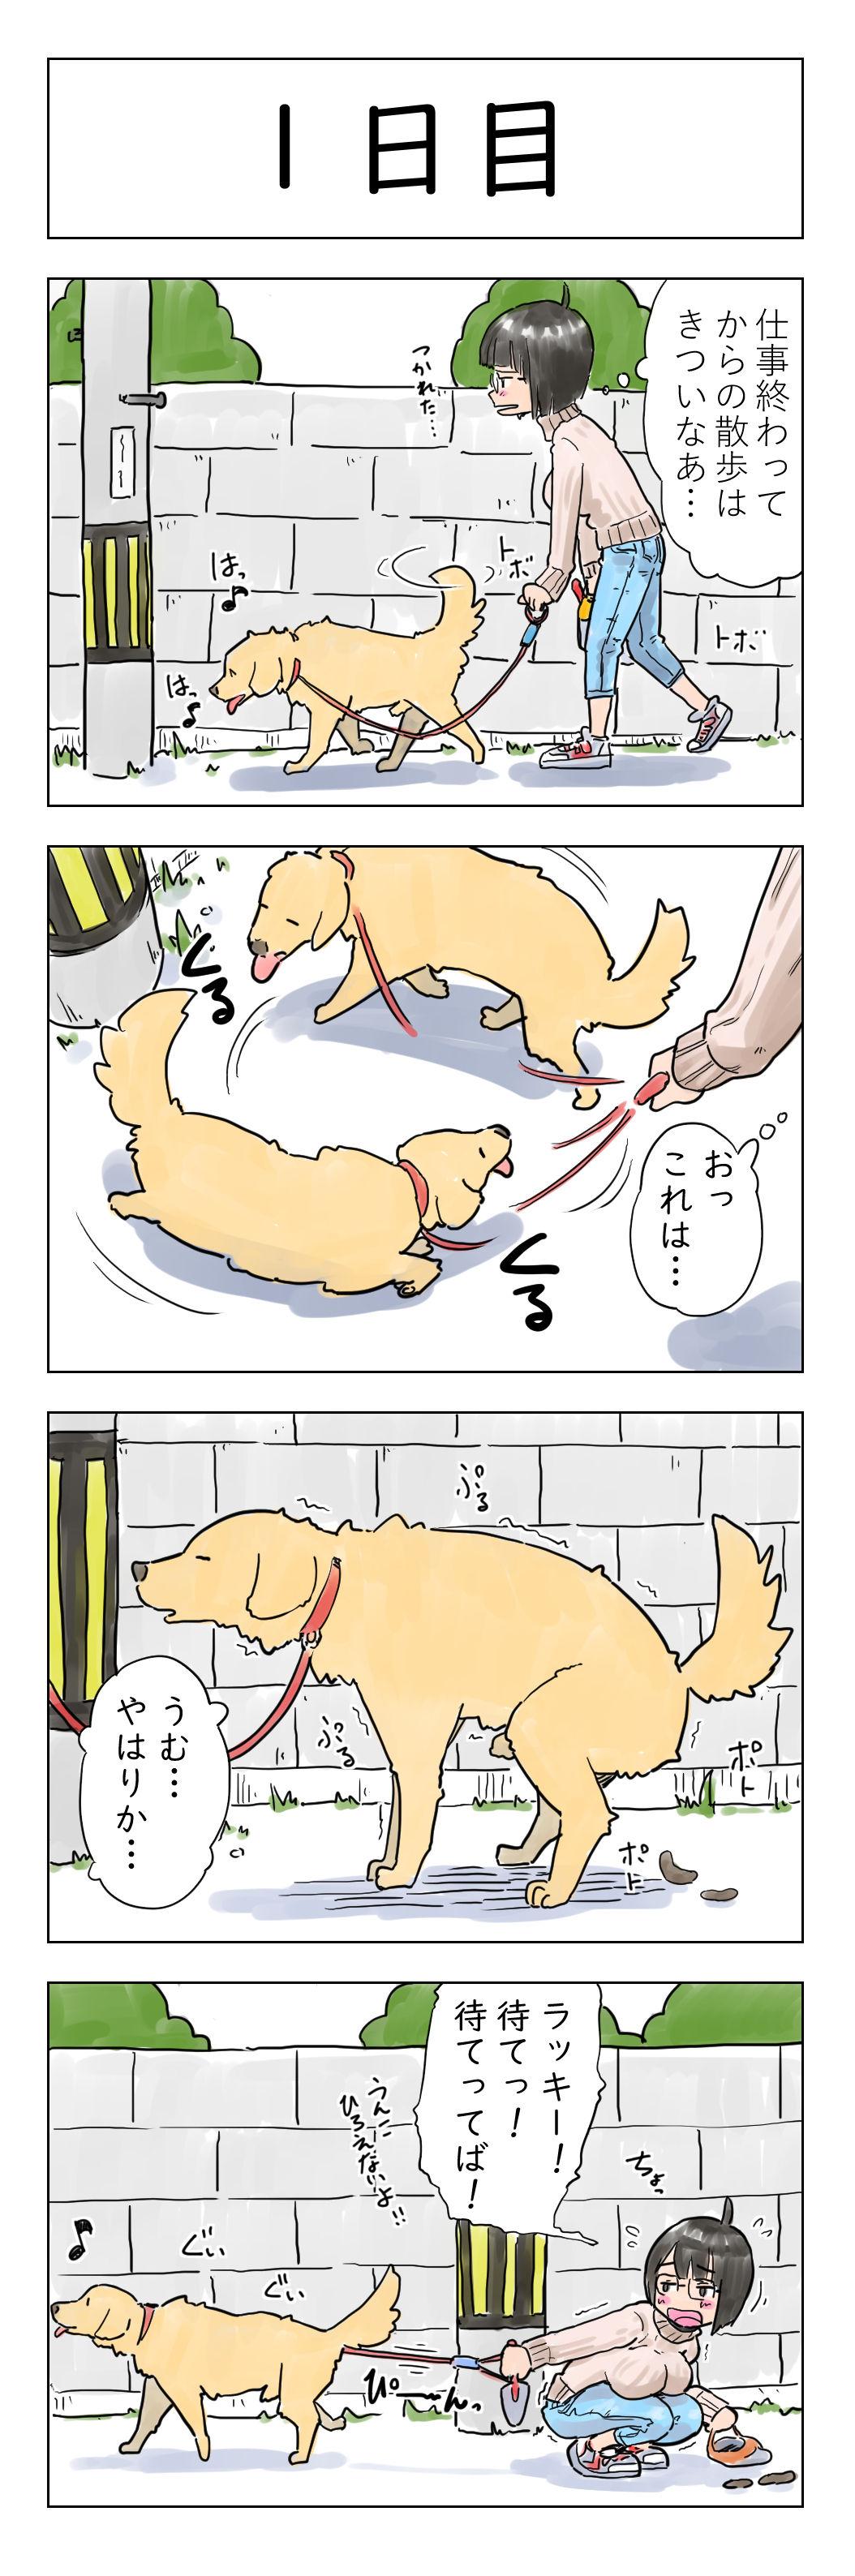 Old And Young 〇日後に愛犬とセックスする地味巨乳メガネちゃん - Original Amateur - Page 2